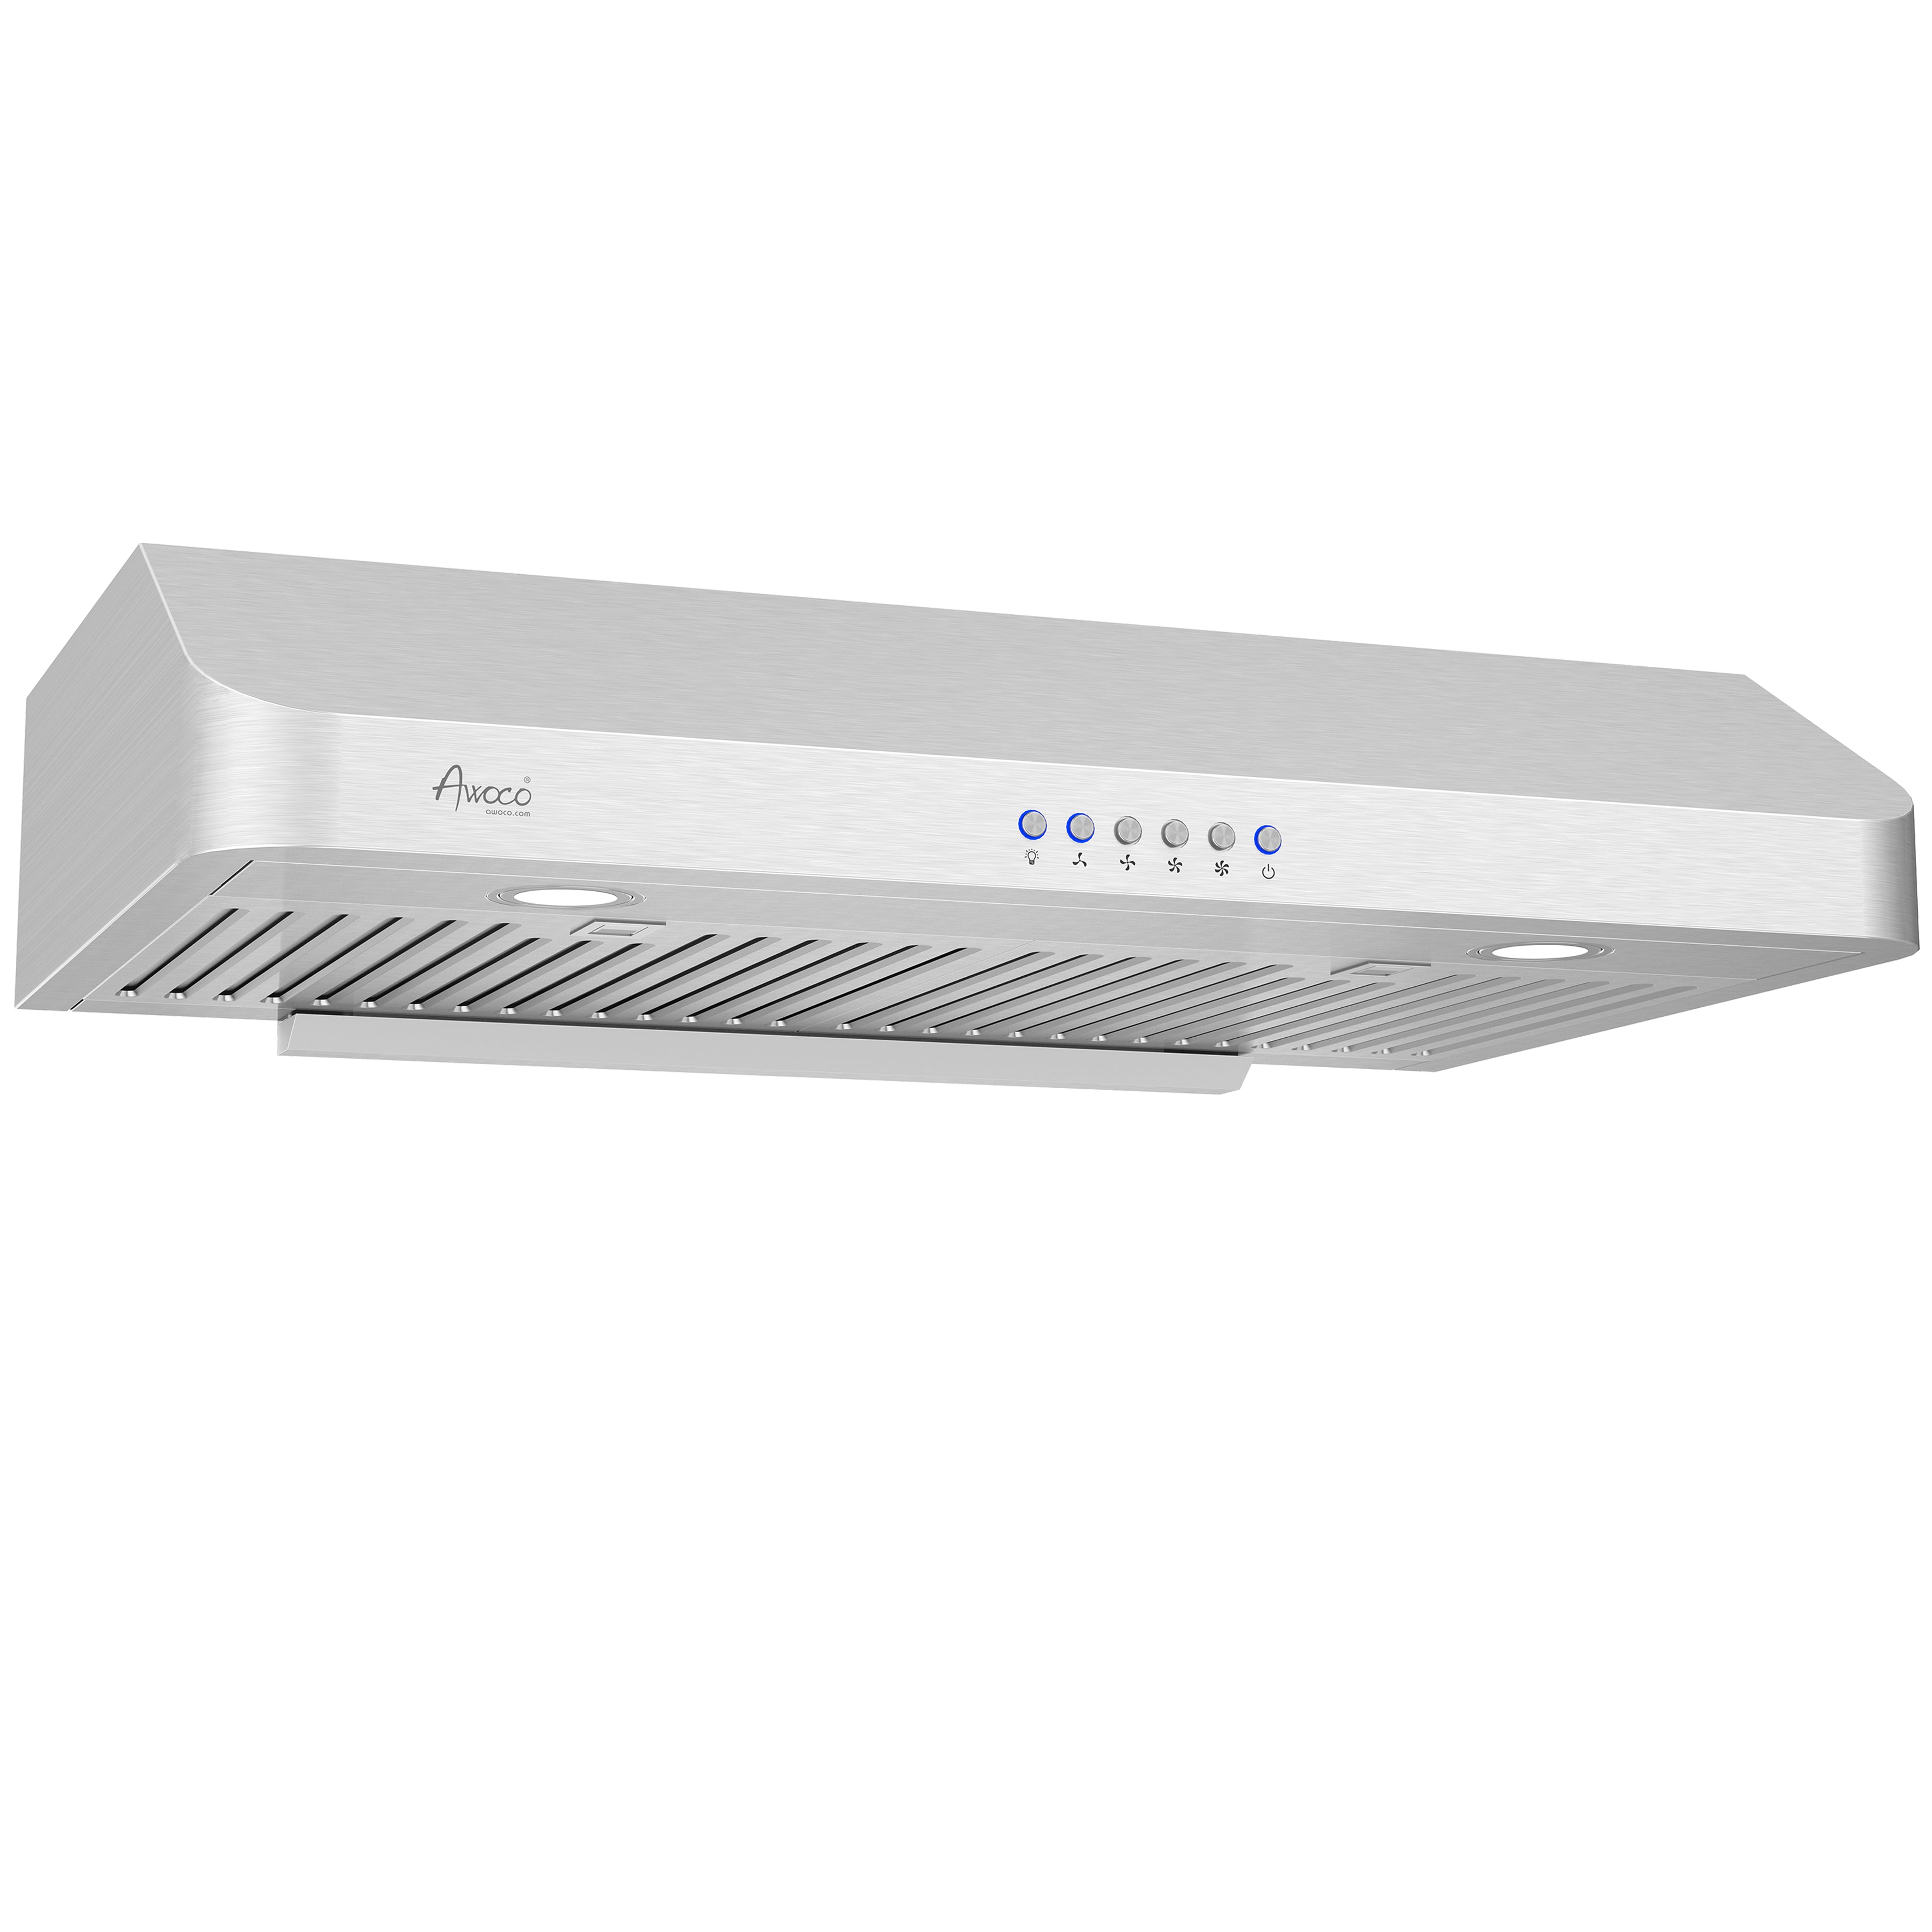 Awoco RH-C06-30 Classic 6" High Stainless Steel Under Cabinet 4 Speeds 900CFM Range Hood with 2 LED Lights